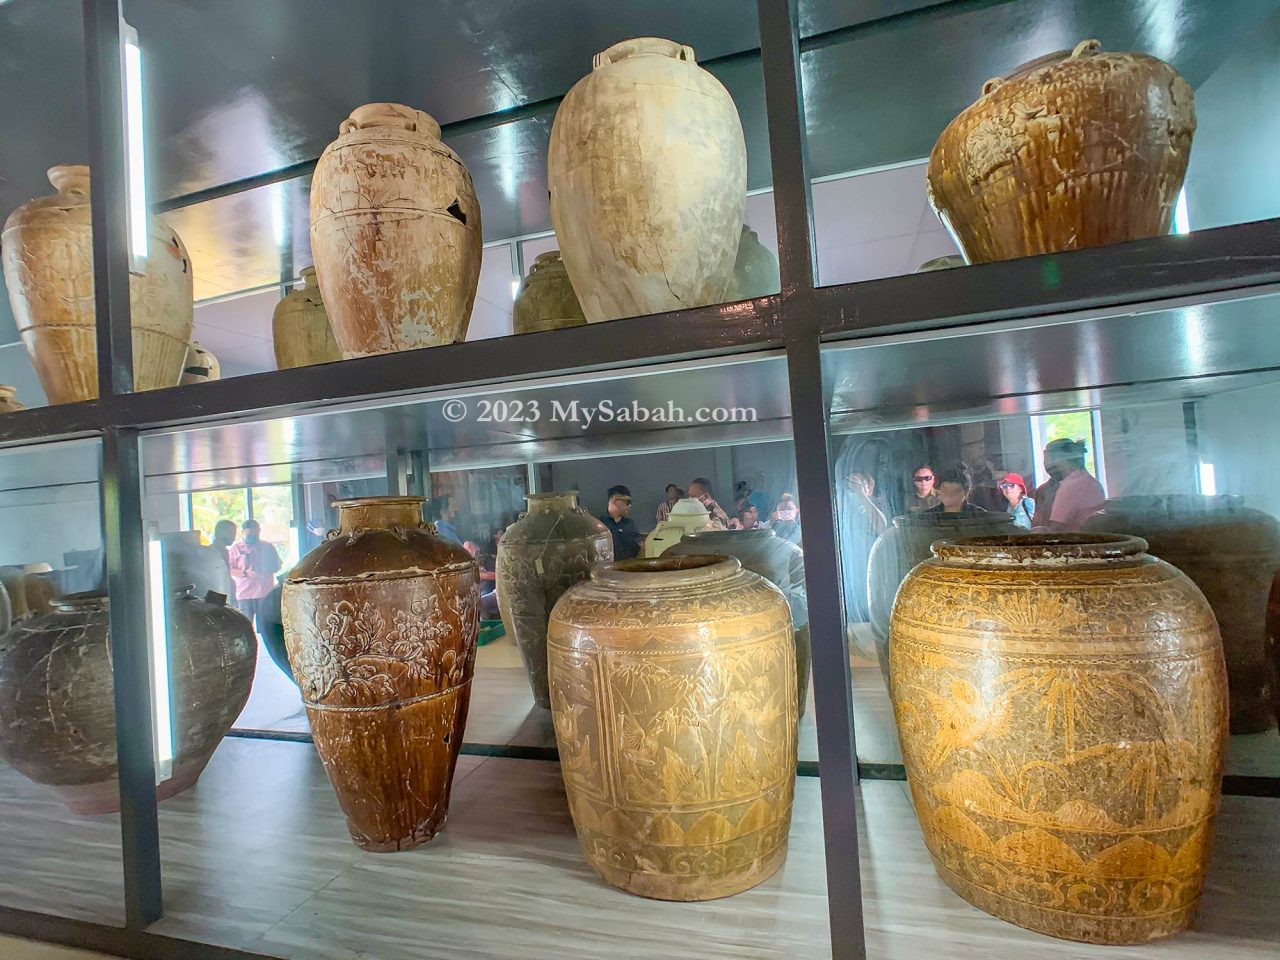 Collection of burial jars at Pogunon Community Museum